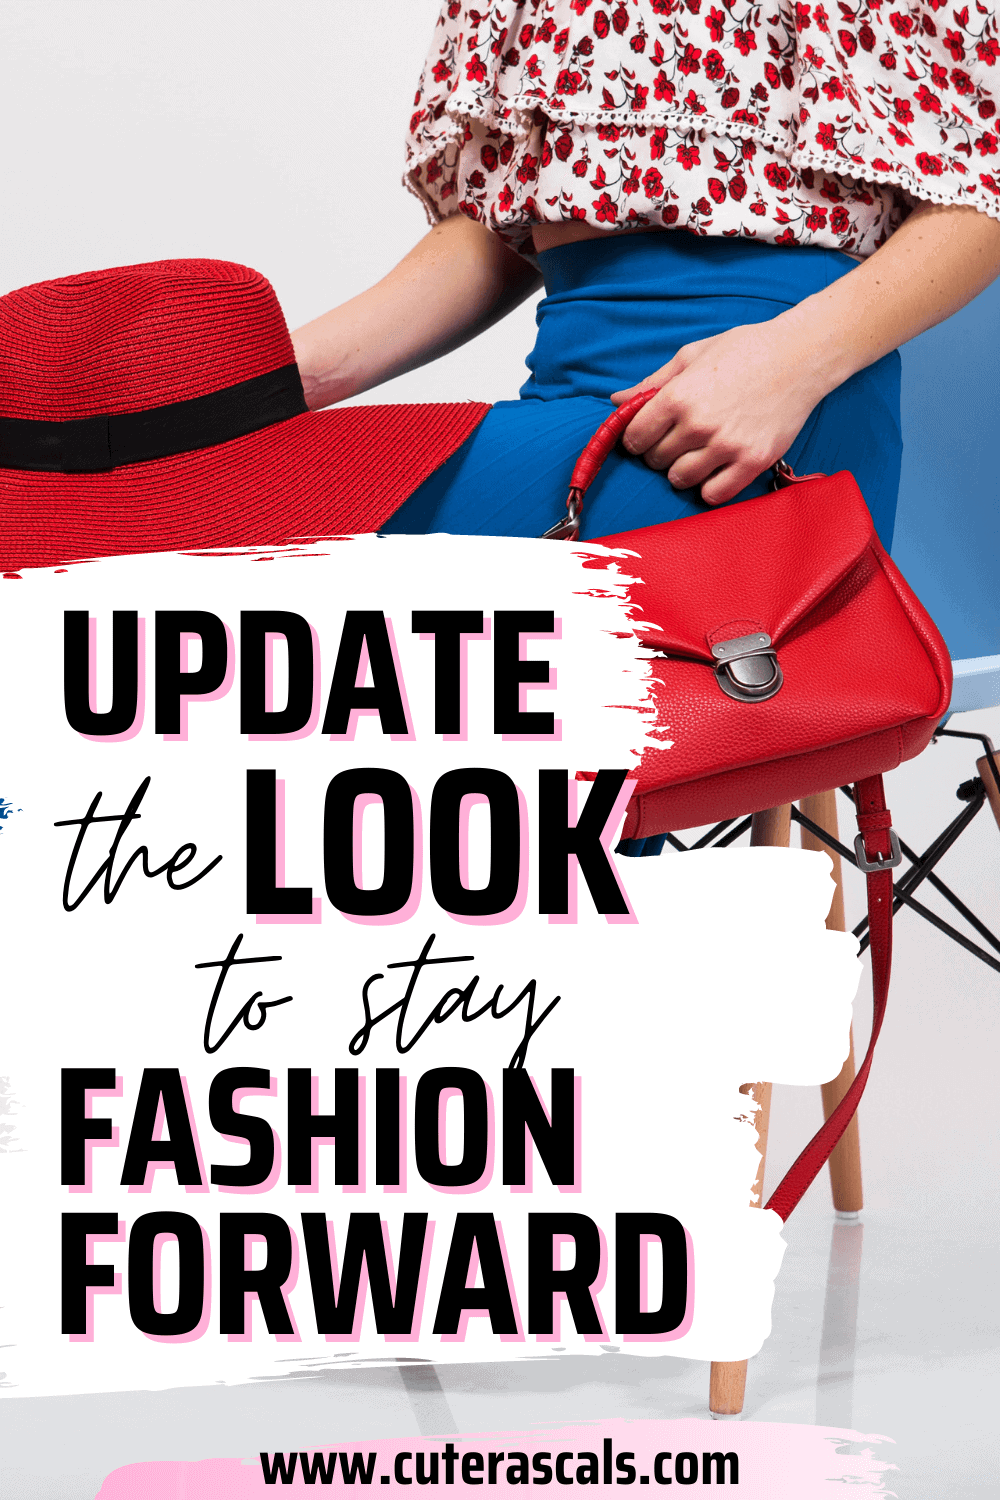 How to Keep the Latest Fashion Trend & Style in a Glamorous Way?